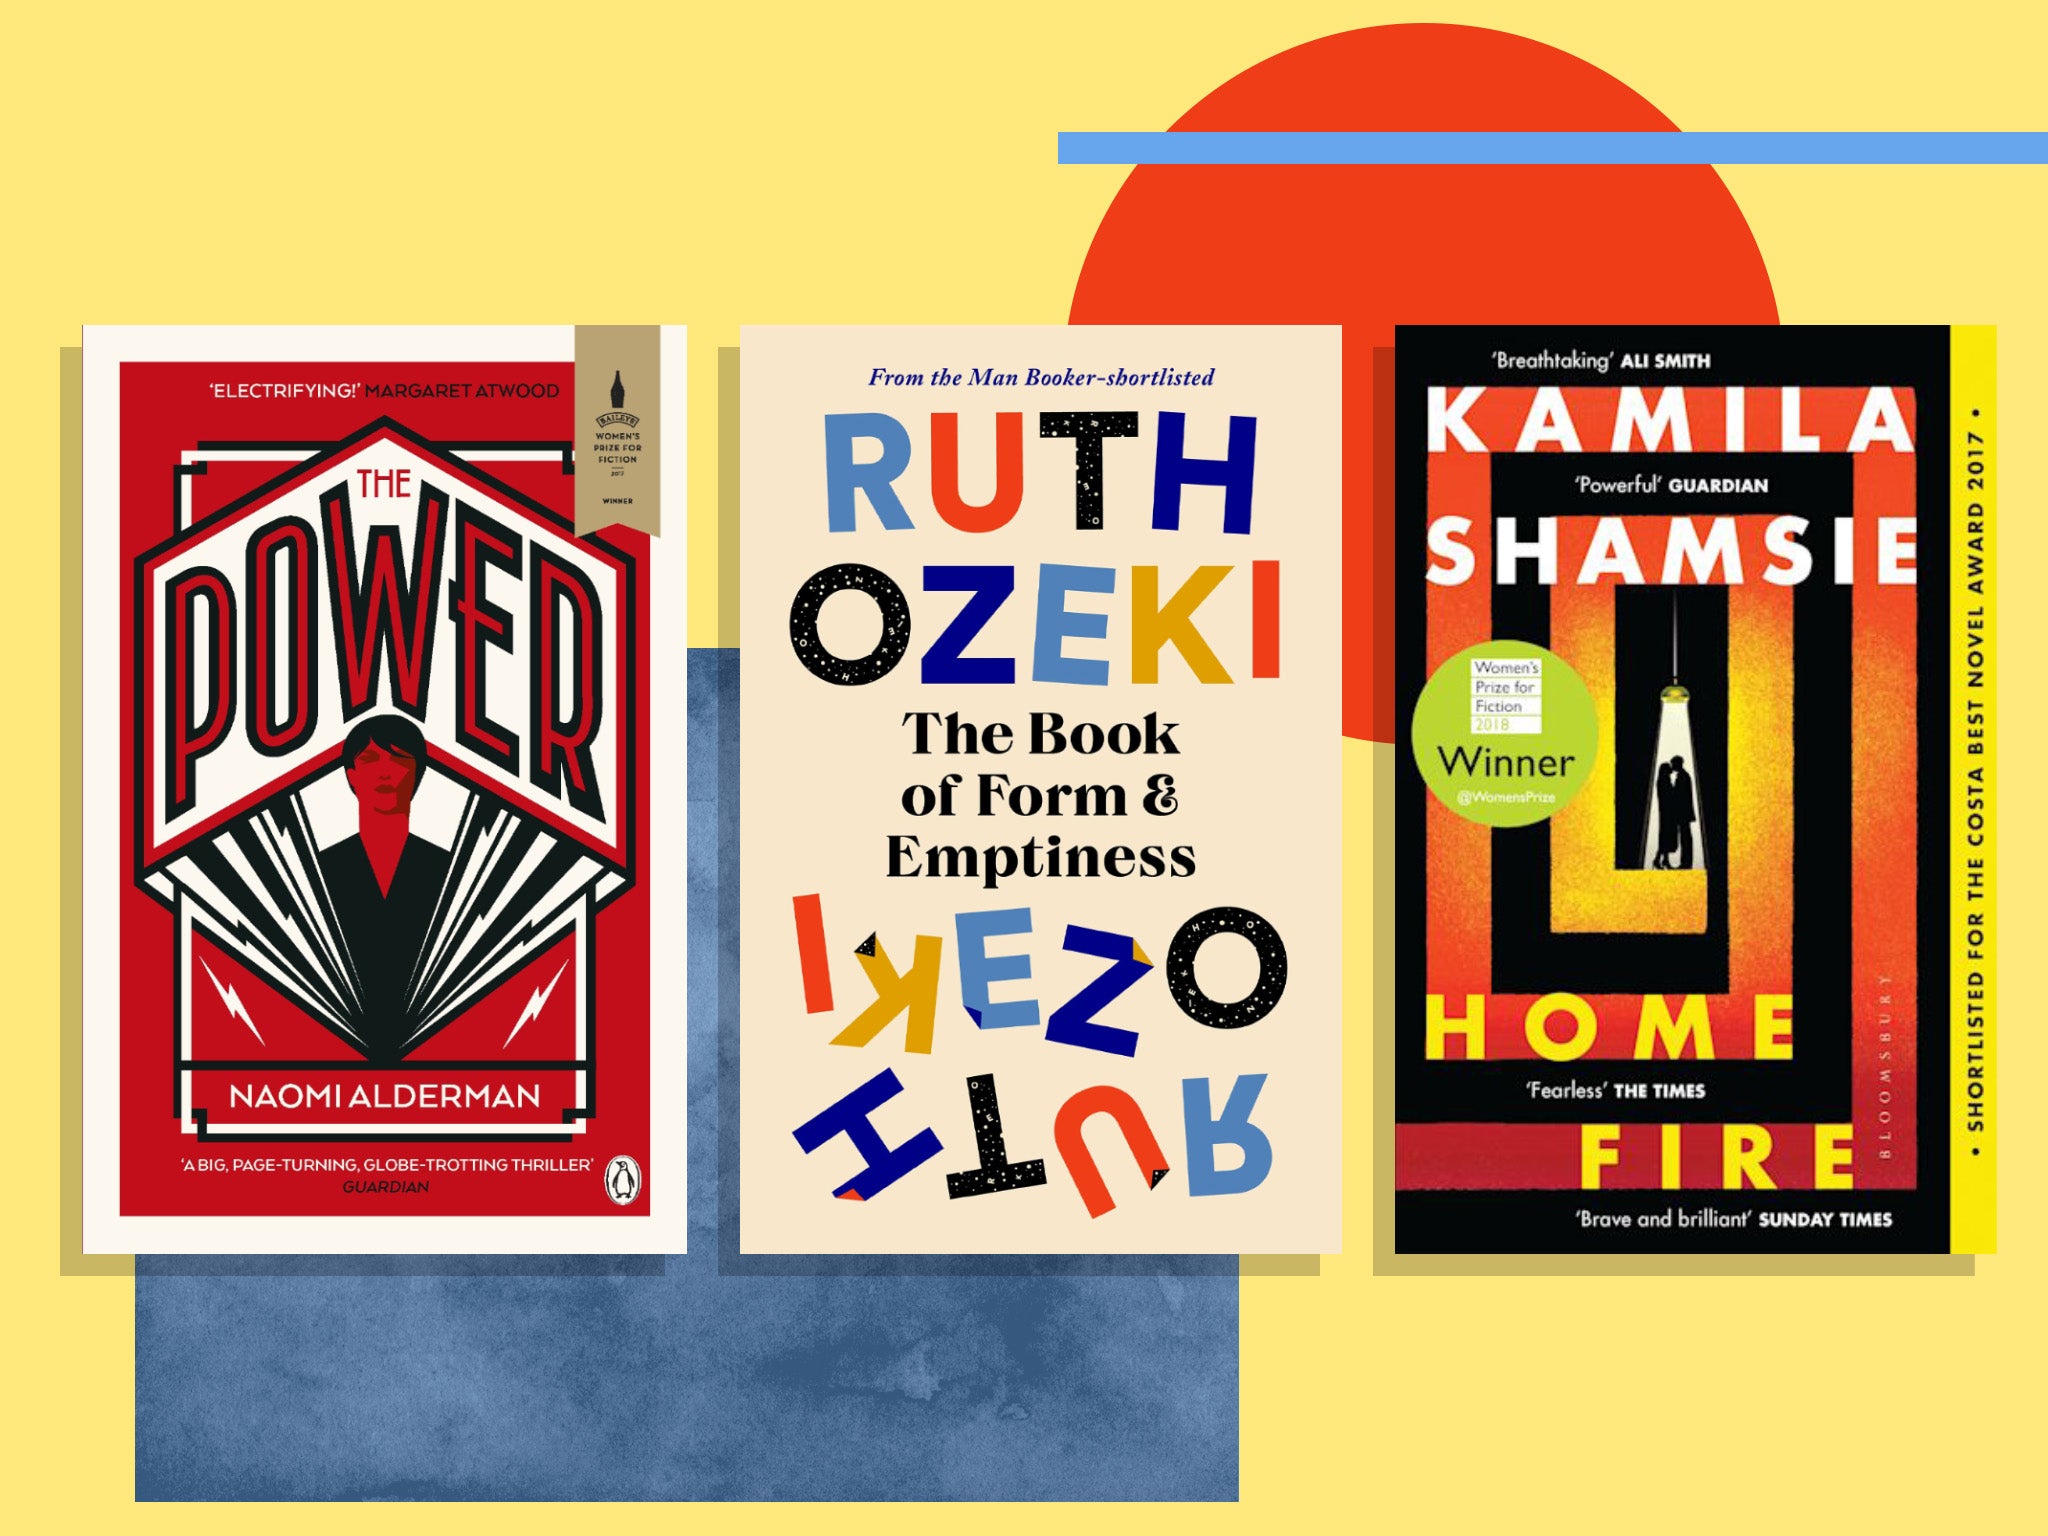 Ruth Ozeki wins the Women’s Prize for Fiction award – read her novel and the previous top titles now